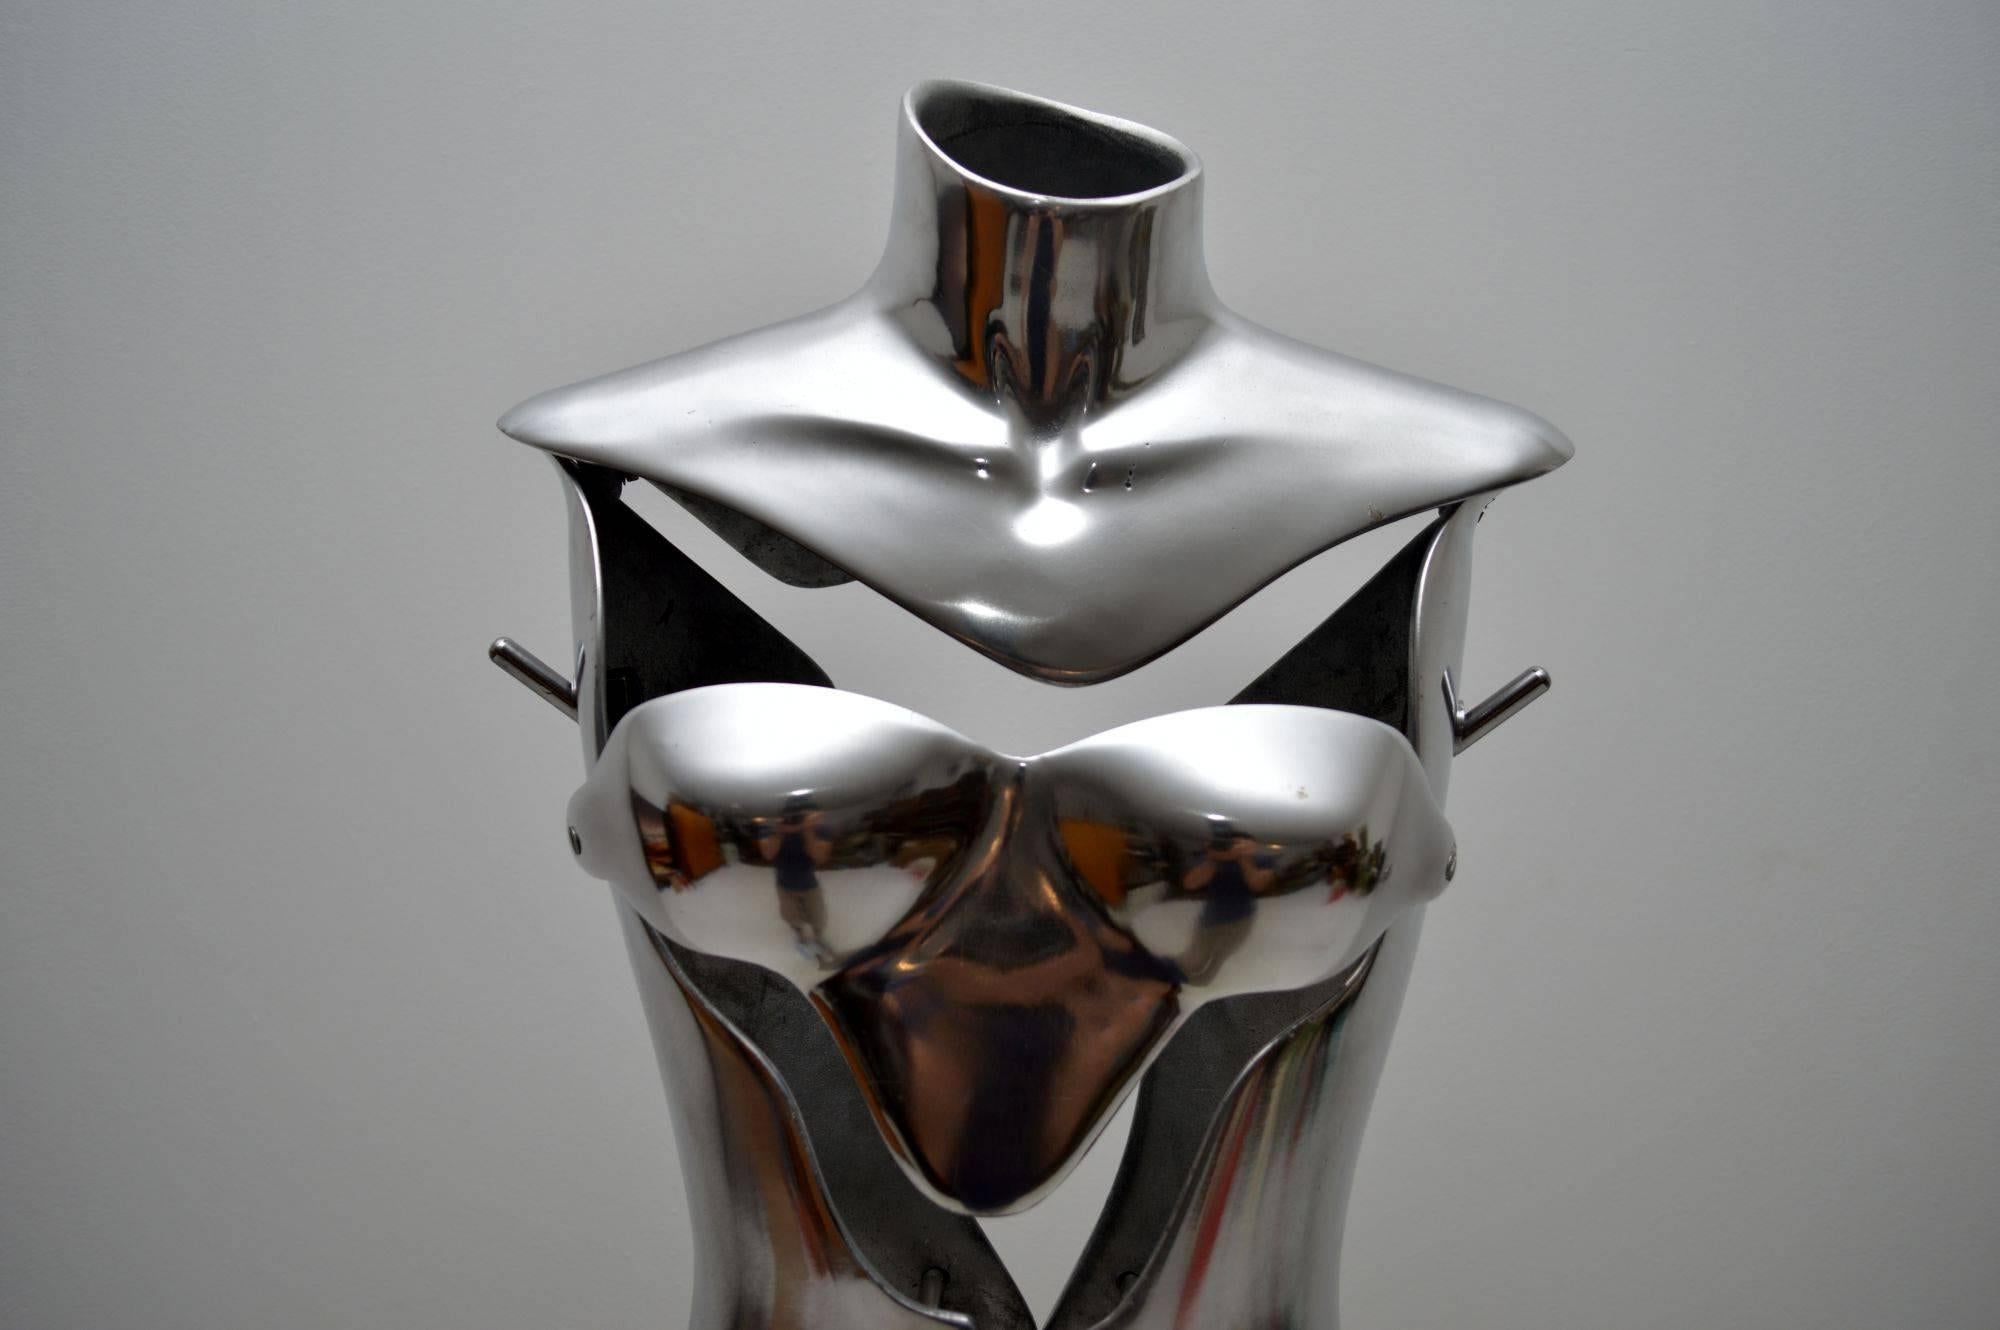 This stunning aluminium and steel mannequin was designed and executed by Nigel Coates in 1993 for Jigsaw of Knightsbridge. They were a limited amount made for Jigsaw and we have a few of these for sale, but they are a limited edition so we can’t